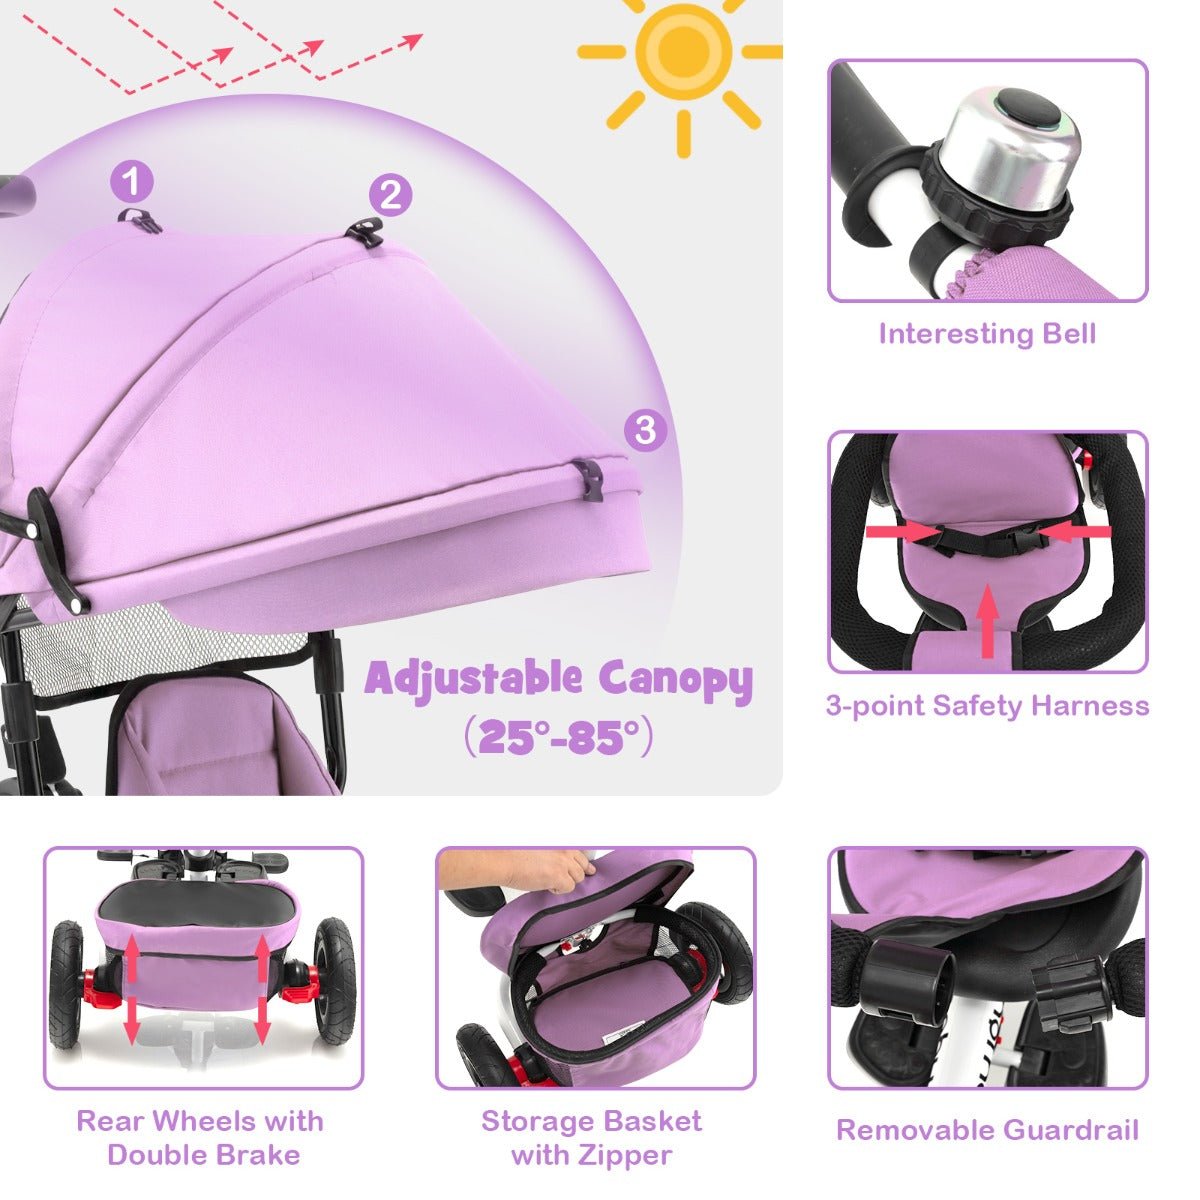 Pink Baby Stroller Tricycle: Your Baby's Joy Ride at Kids Mega Mart